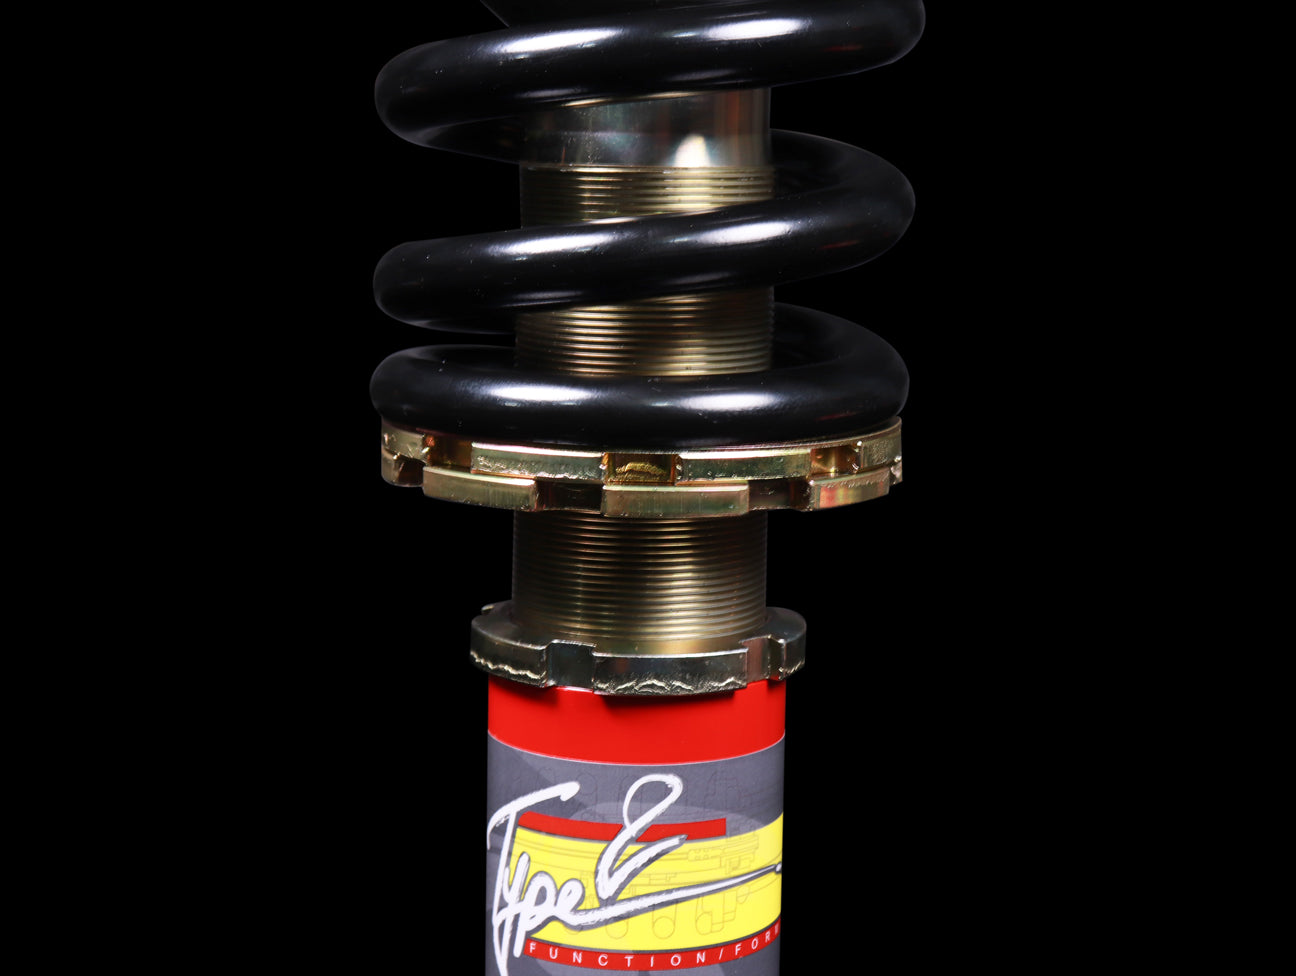 Function & Form Type II Coilovers - Integra / RSX